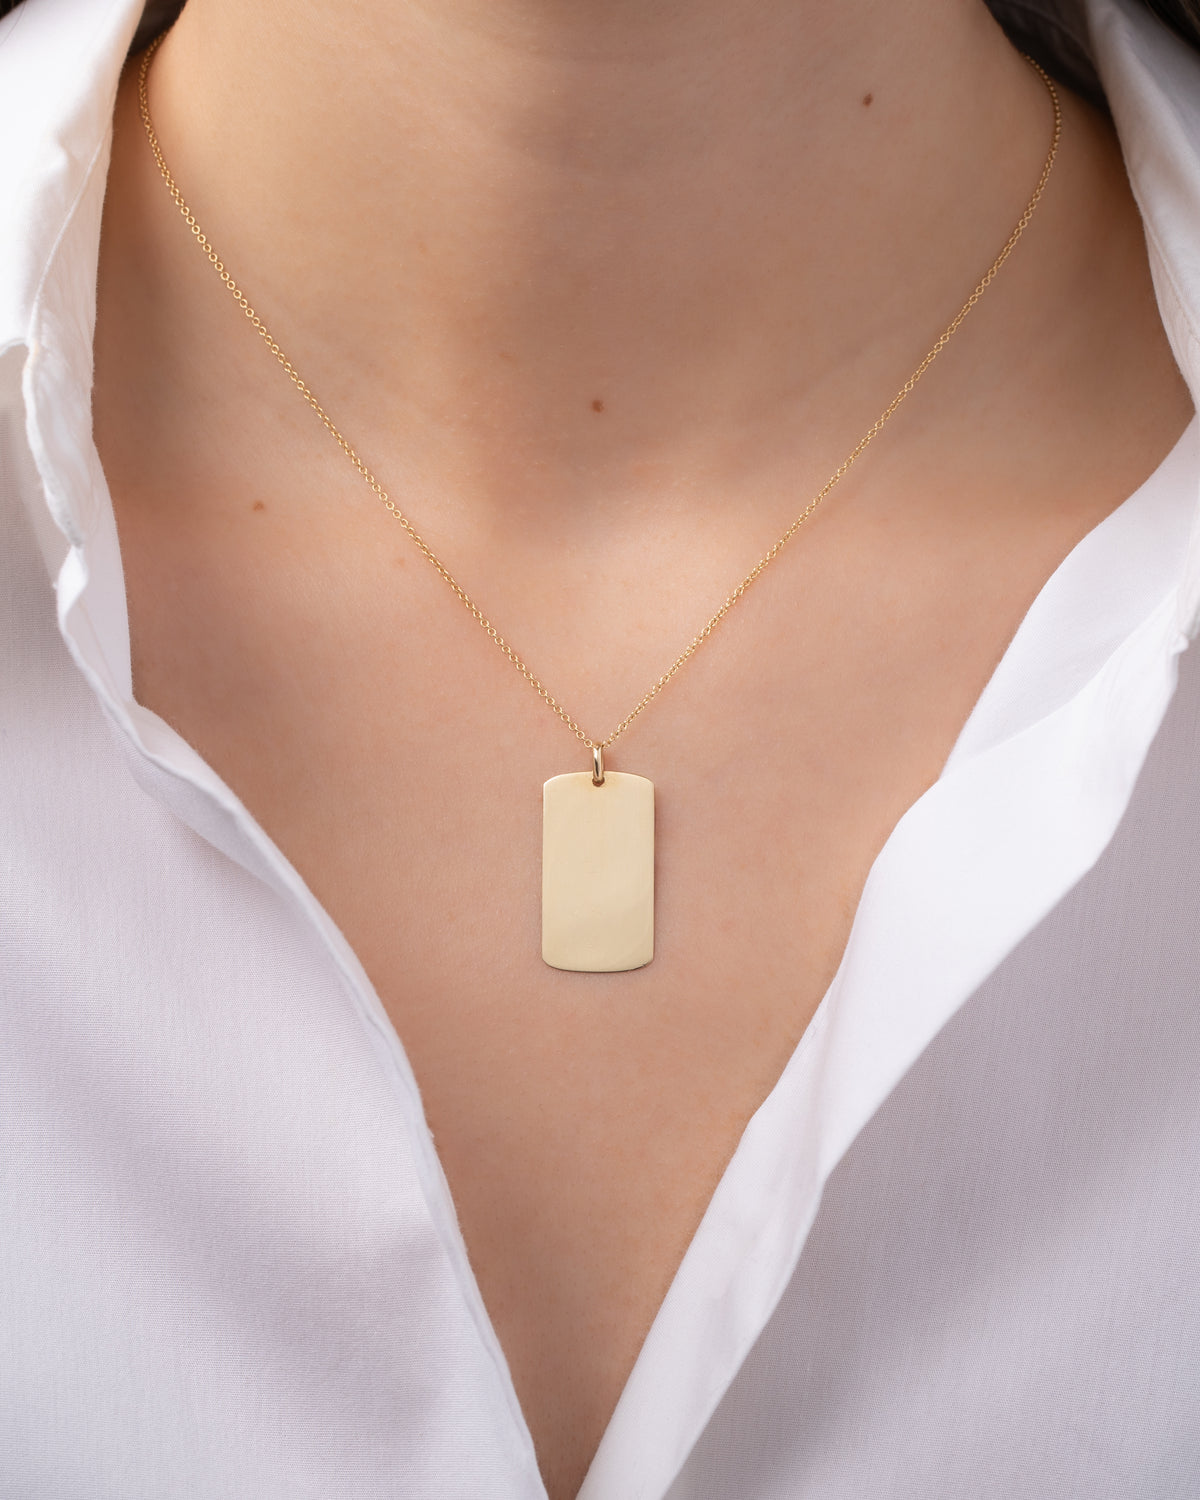 14k Gold Small Dog Tag Necklace